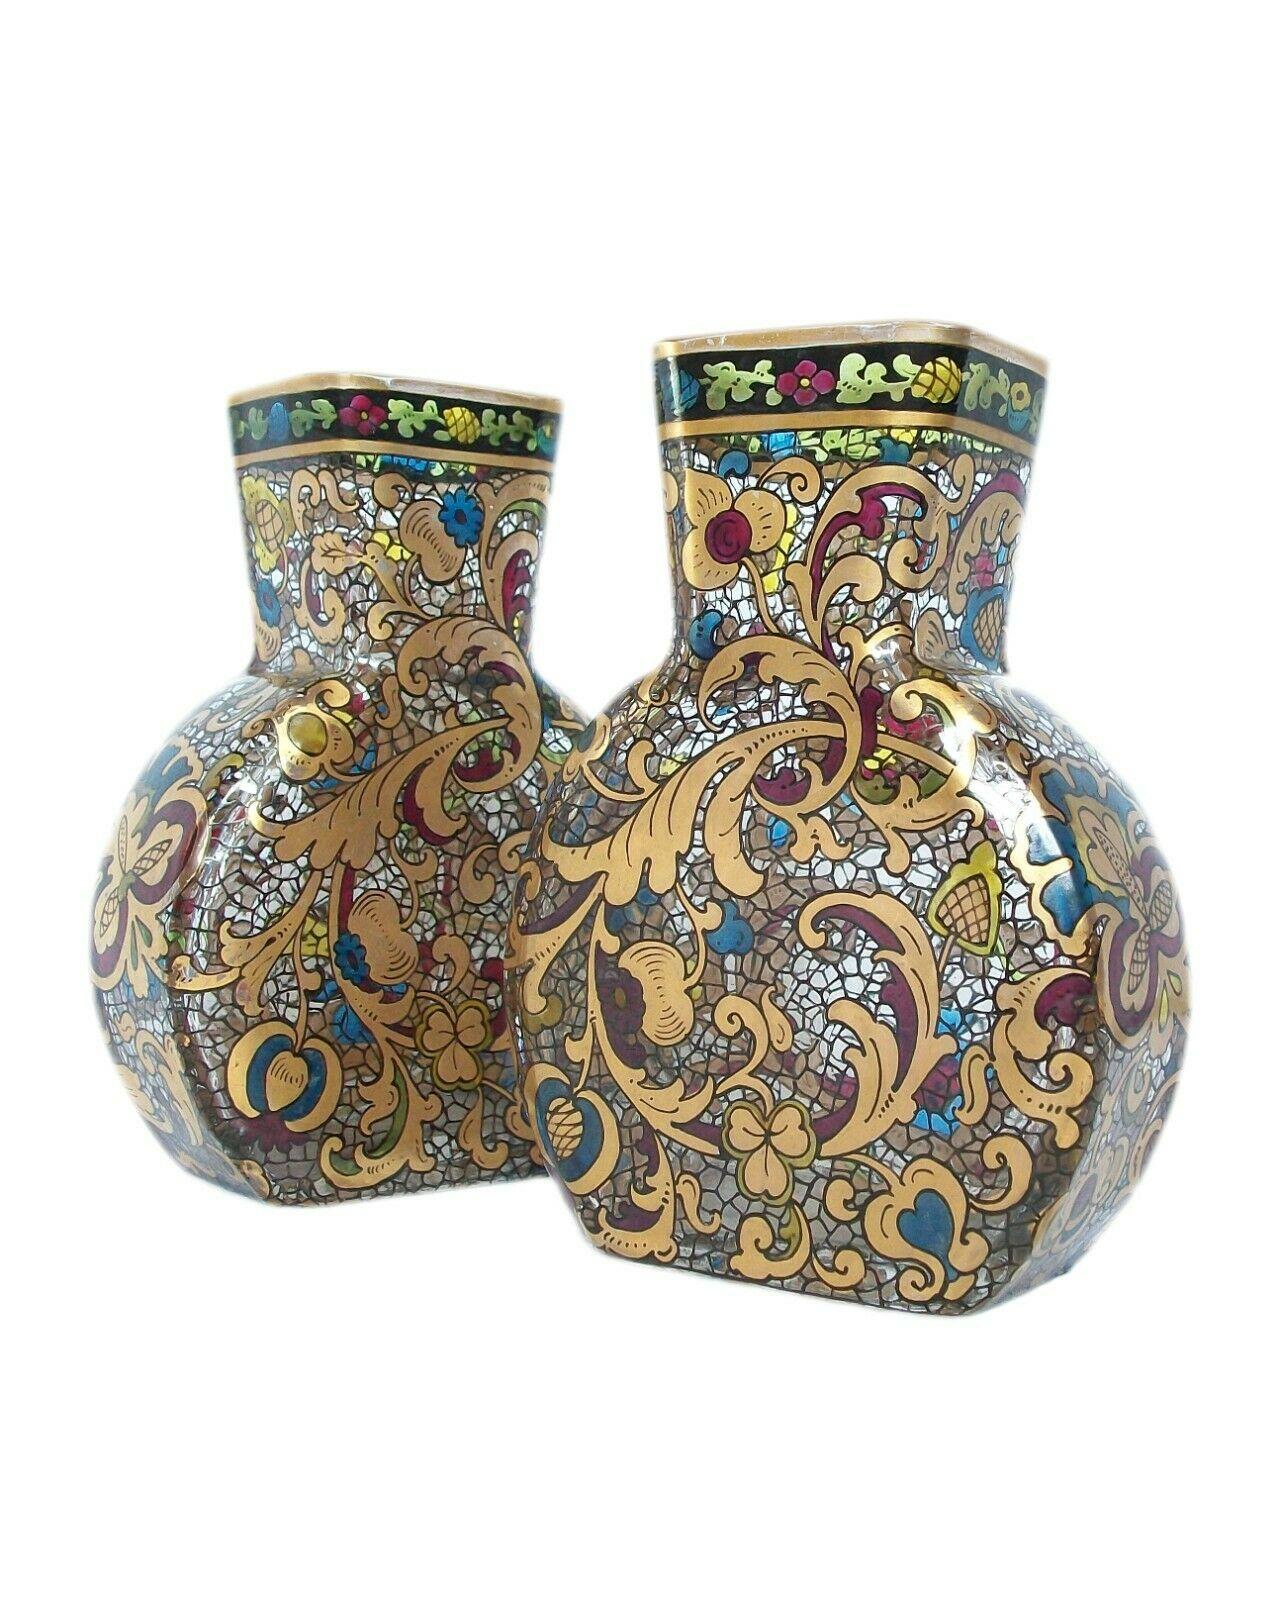 Petite pair of Renaissance style gilded and enameled glass vases - hand painted with scrolling acanthus leaves and flowers with banded borders to the top edges (resembling stained glass) - all set against a painted 'crackle' or wire work background